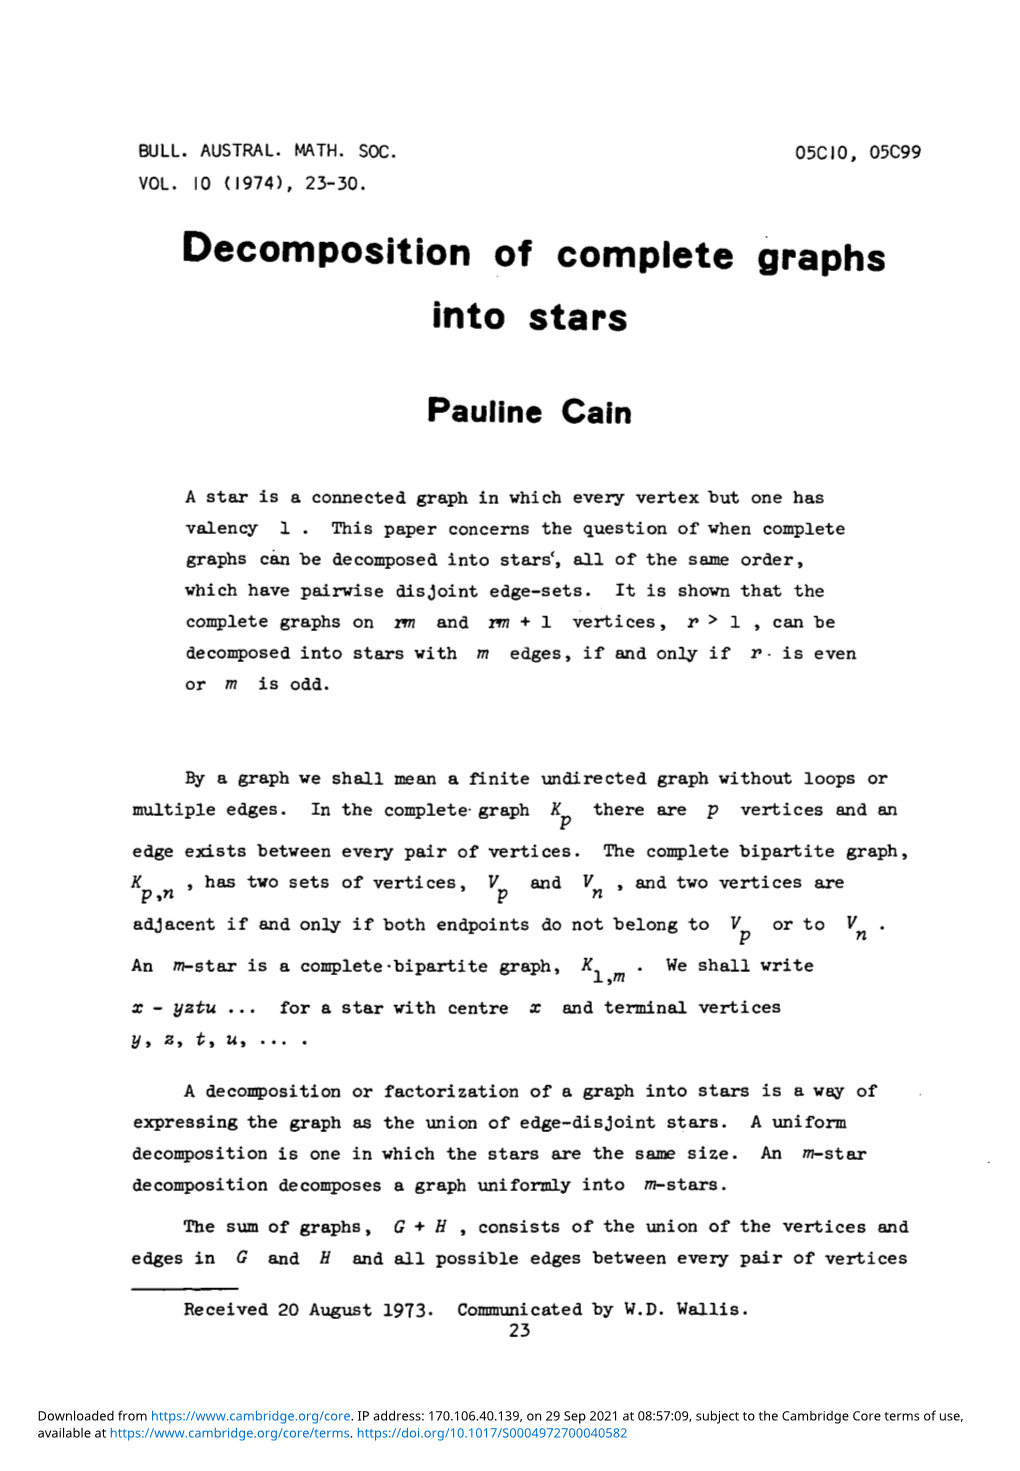 Decomposition of Complete Graphs Into Stars